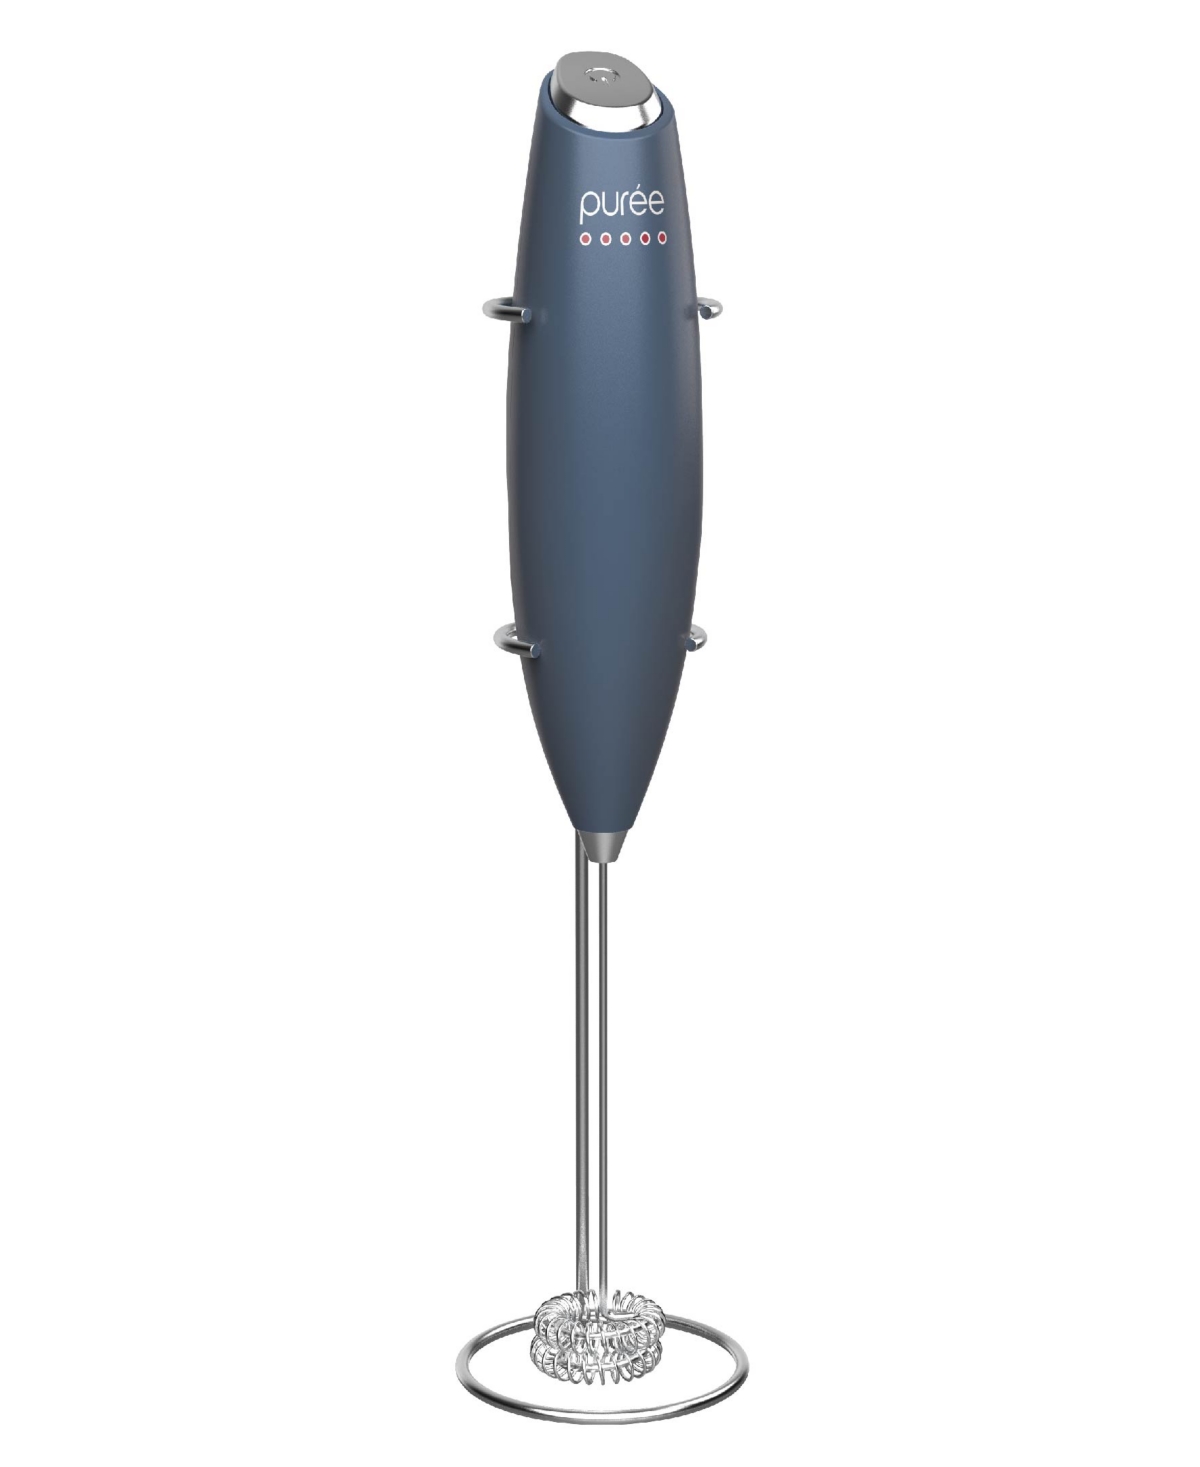 Tzumi Puree Milk Frother, Battery-powered Handheld Milk Frother Wand In Blue